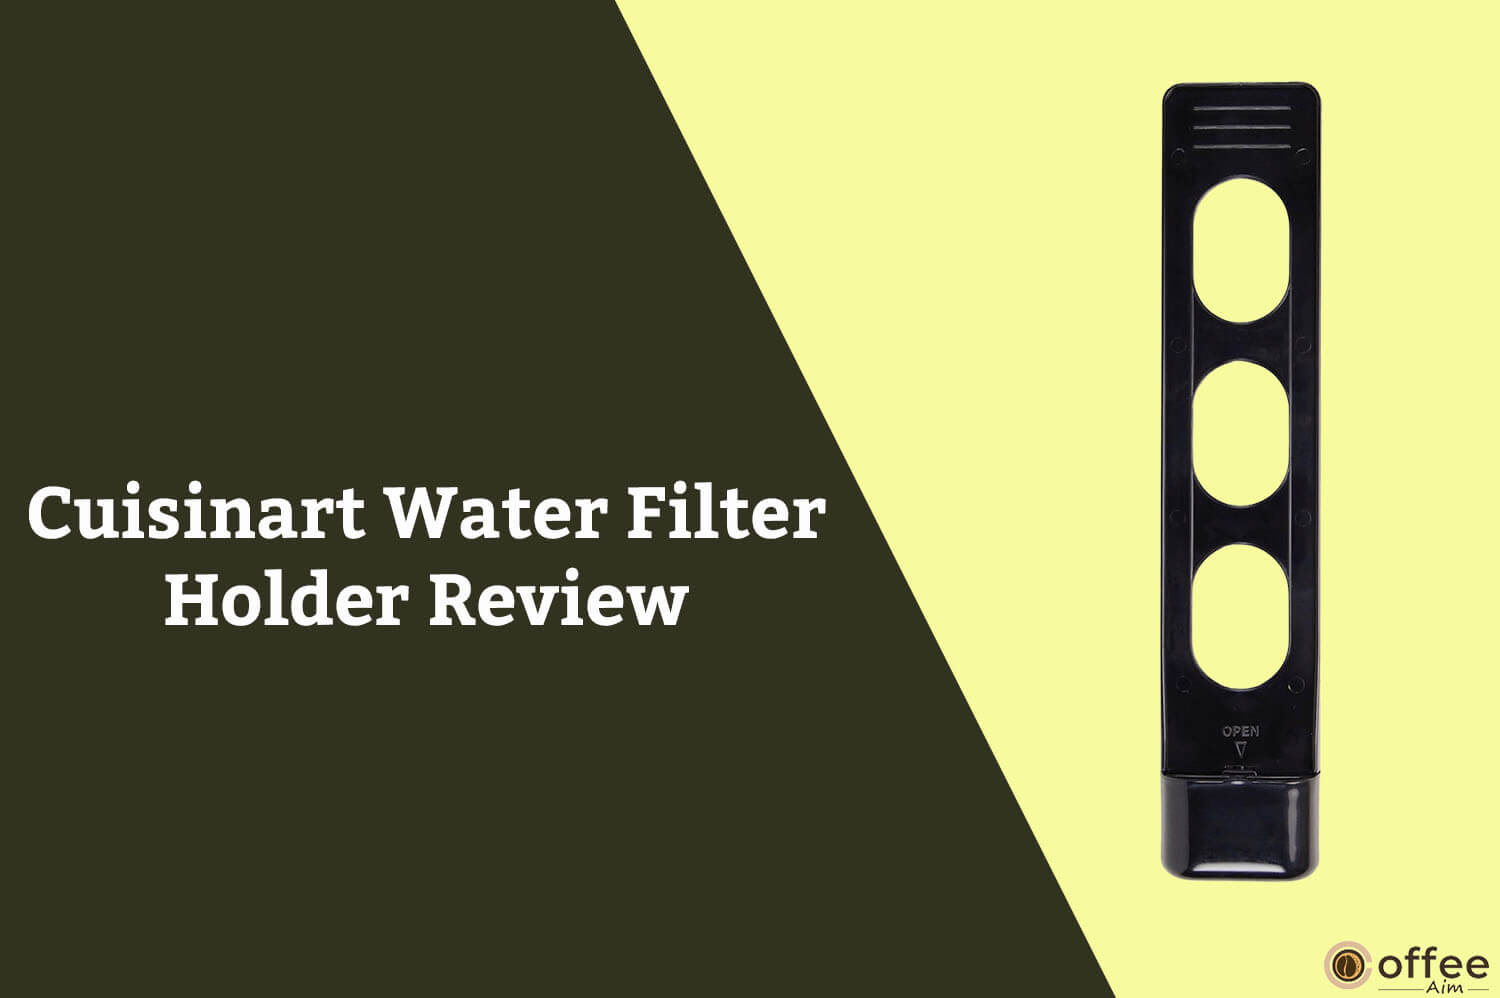 Featured image for the article "Cuisinart Water Filter Holder Review"